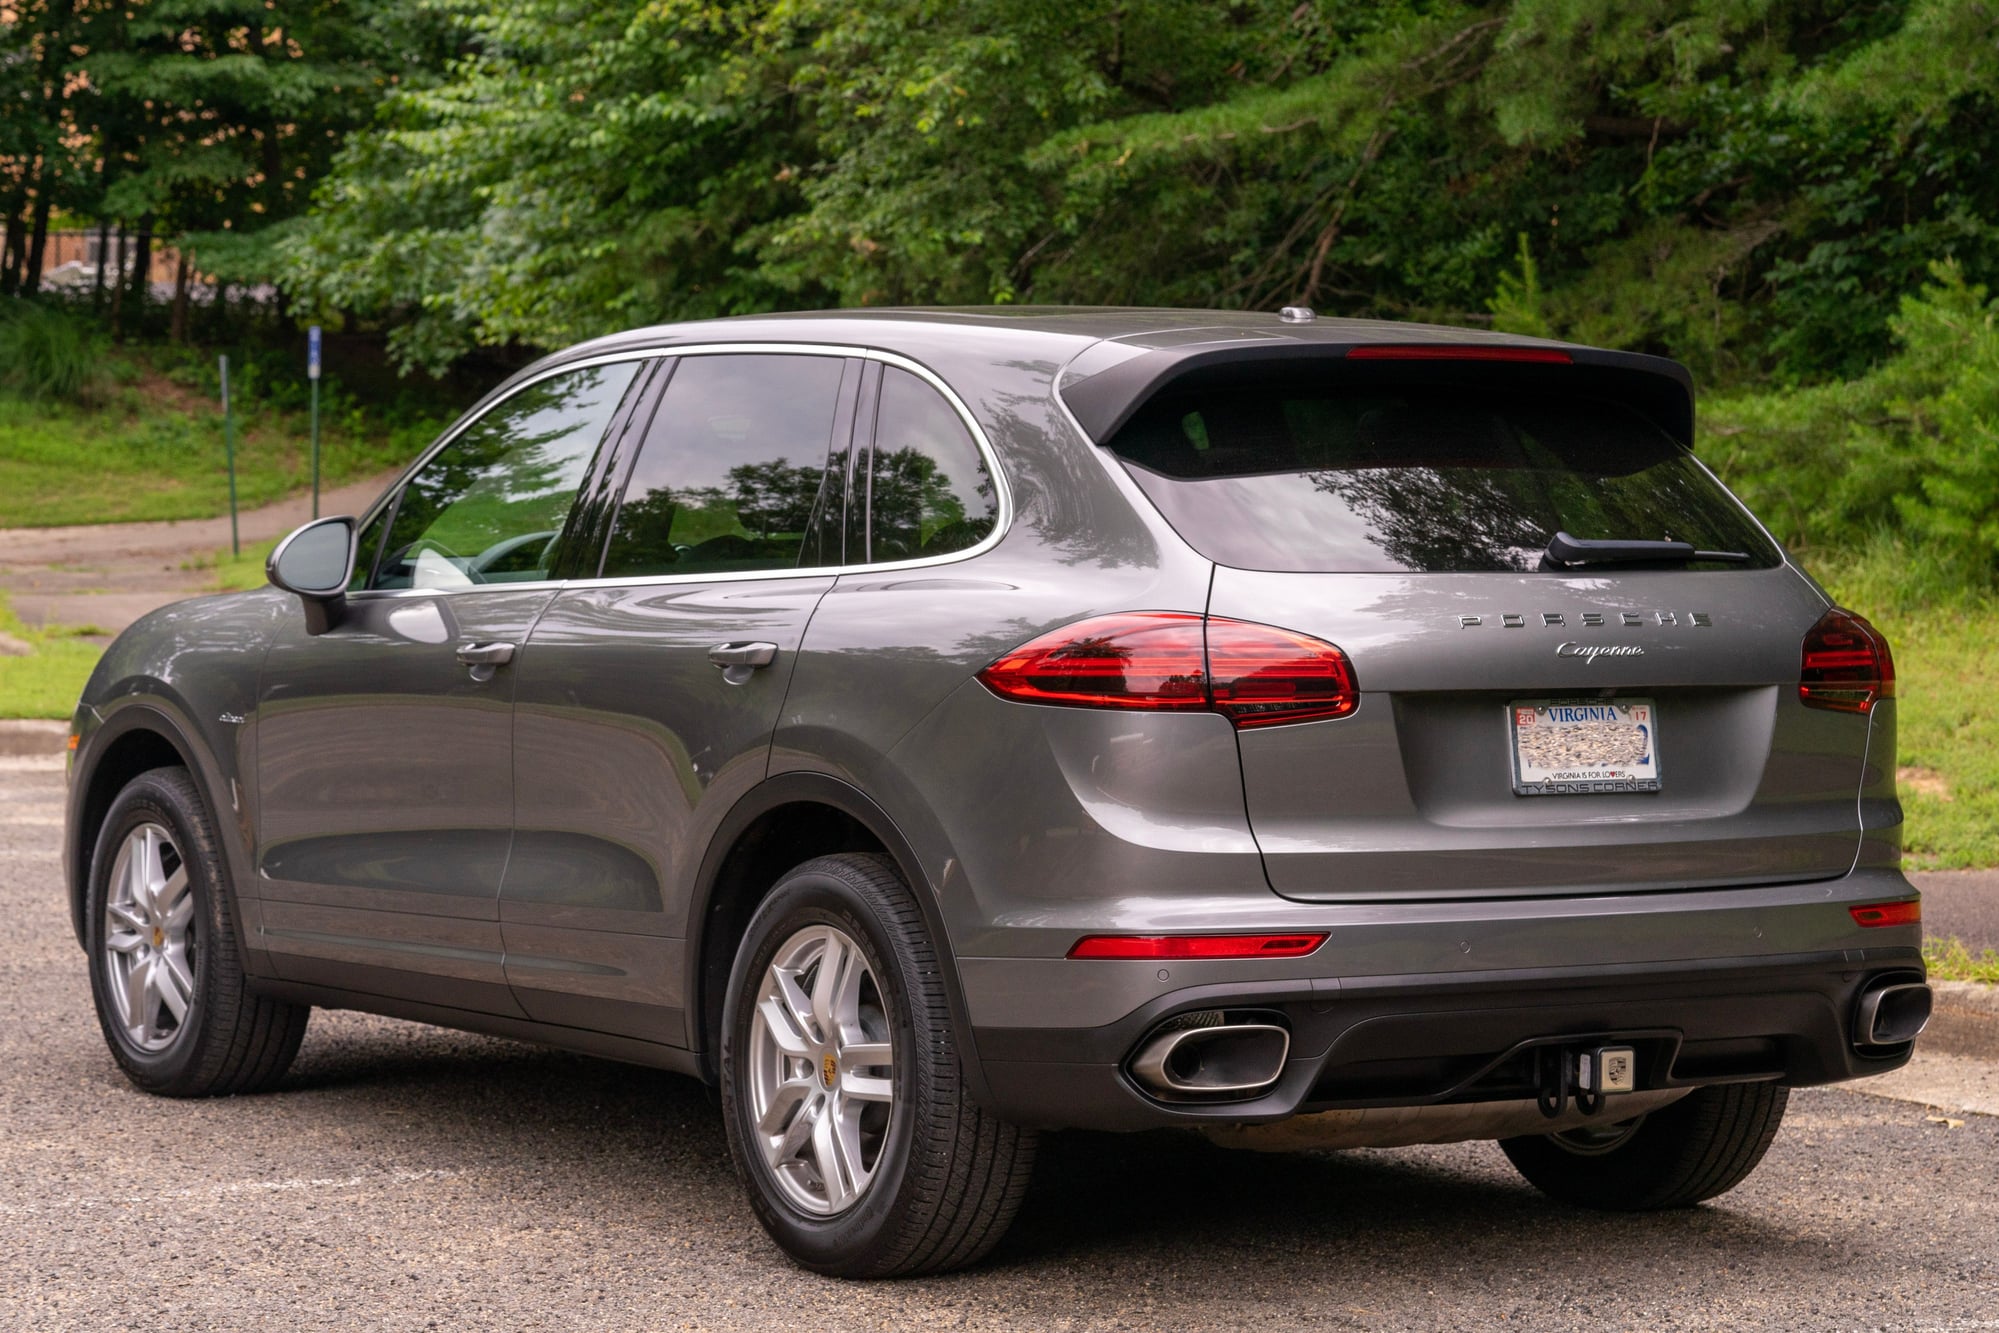 2015 Porsche Cayenne - 2015 Cayenne Diesel, Premium, Panoramic, Tow, LCA, 14-way Vented Seats, Full Warranty - Used - VIN WP1AF2A23FLA43381 - 52,250 Miles - 6 cyl - AWD - Automatic - SUV - Gray - Oakton, VA 22124, United States